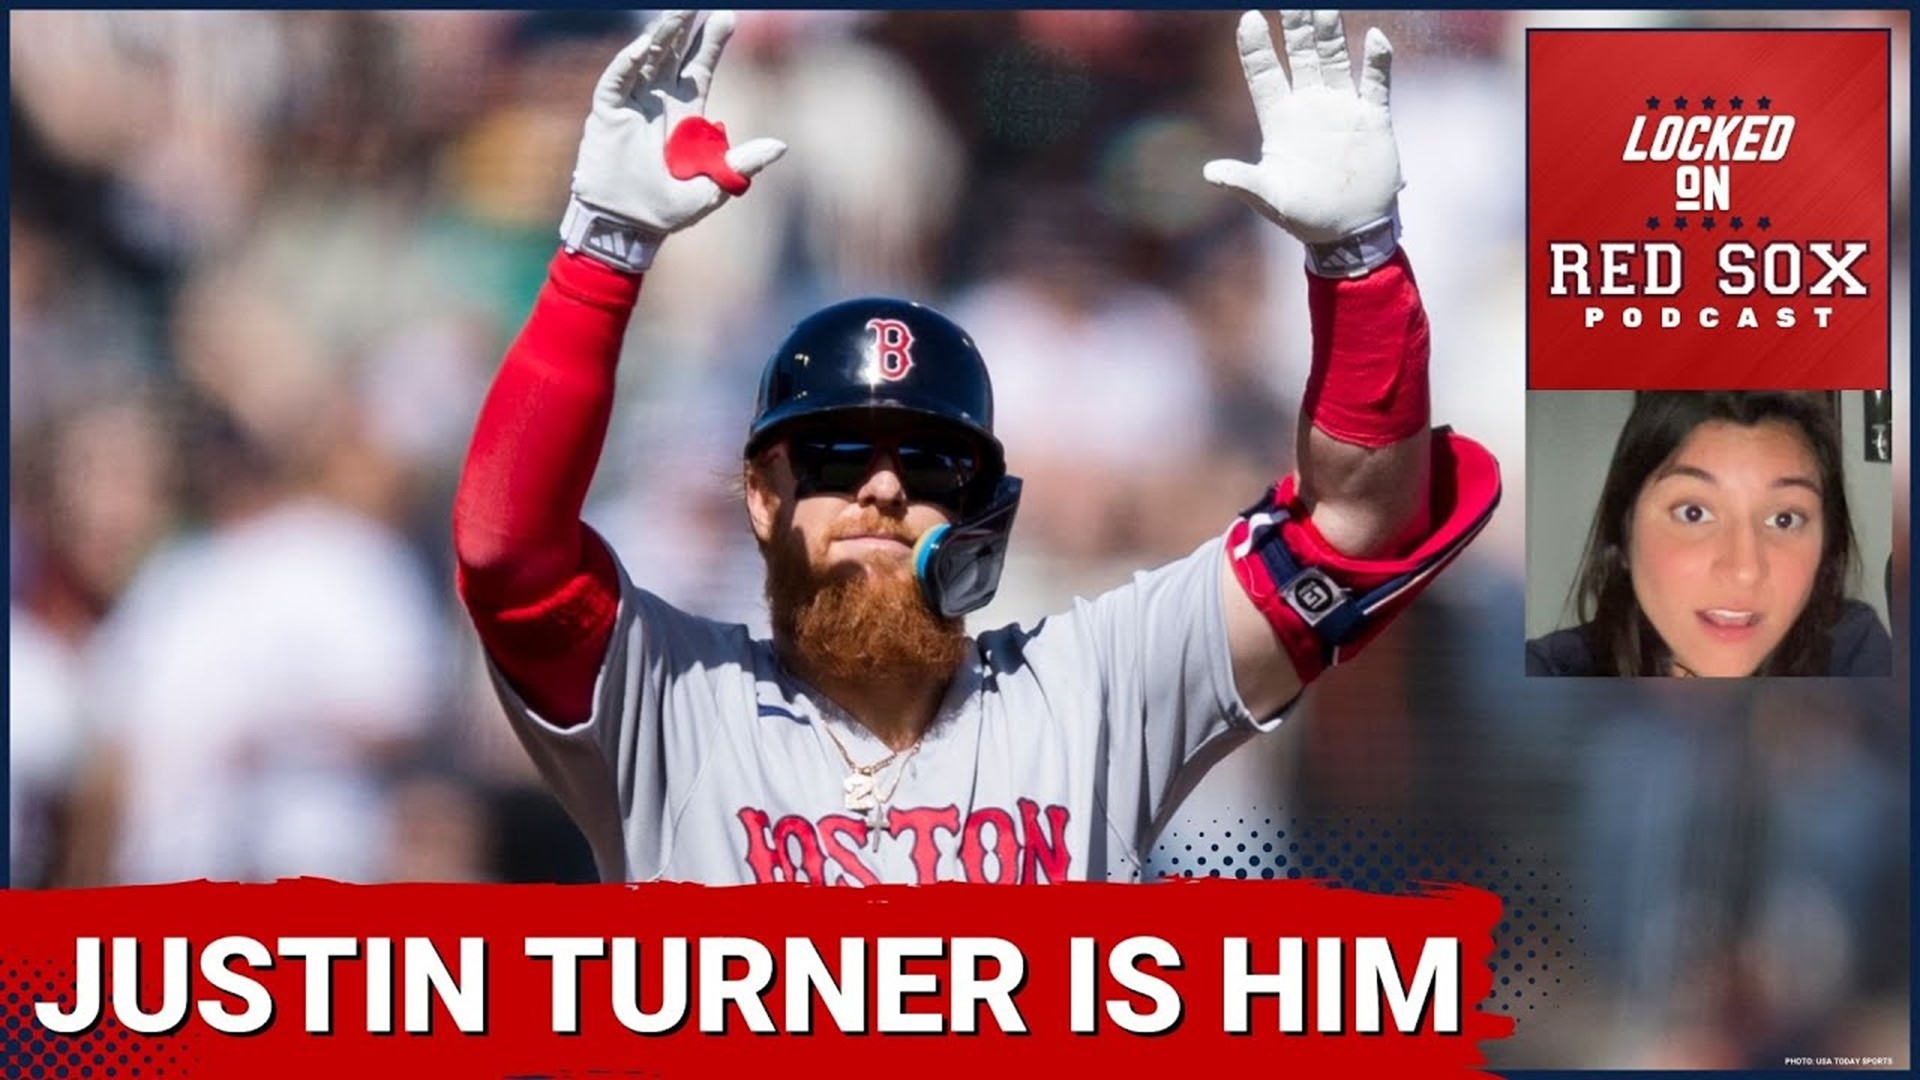 Justin Turner is recognized for his heart, motivation as Boston Red Sox  leader, Locked On Red Sox